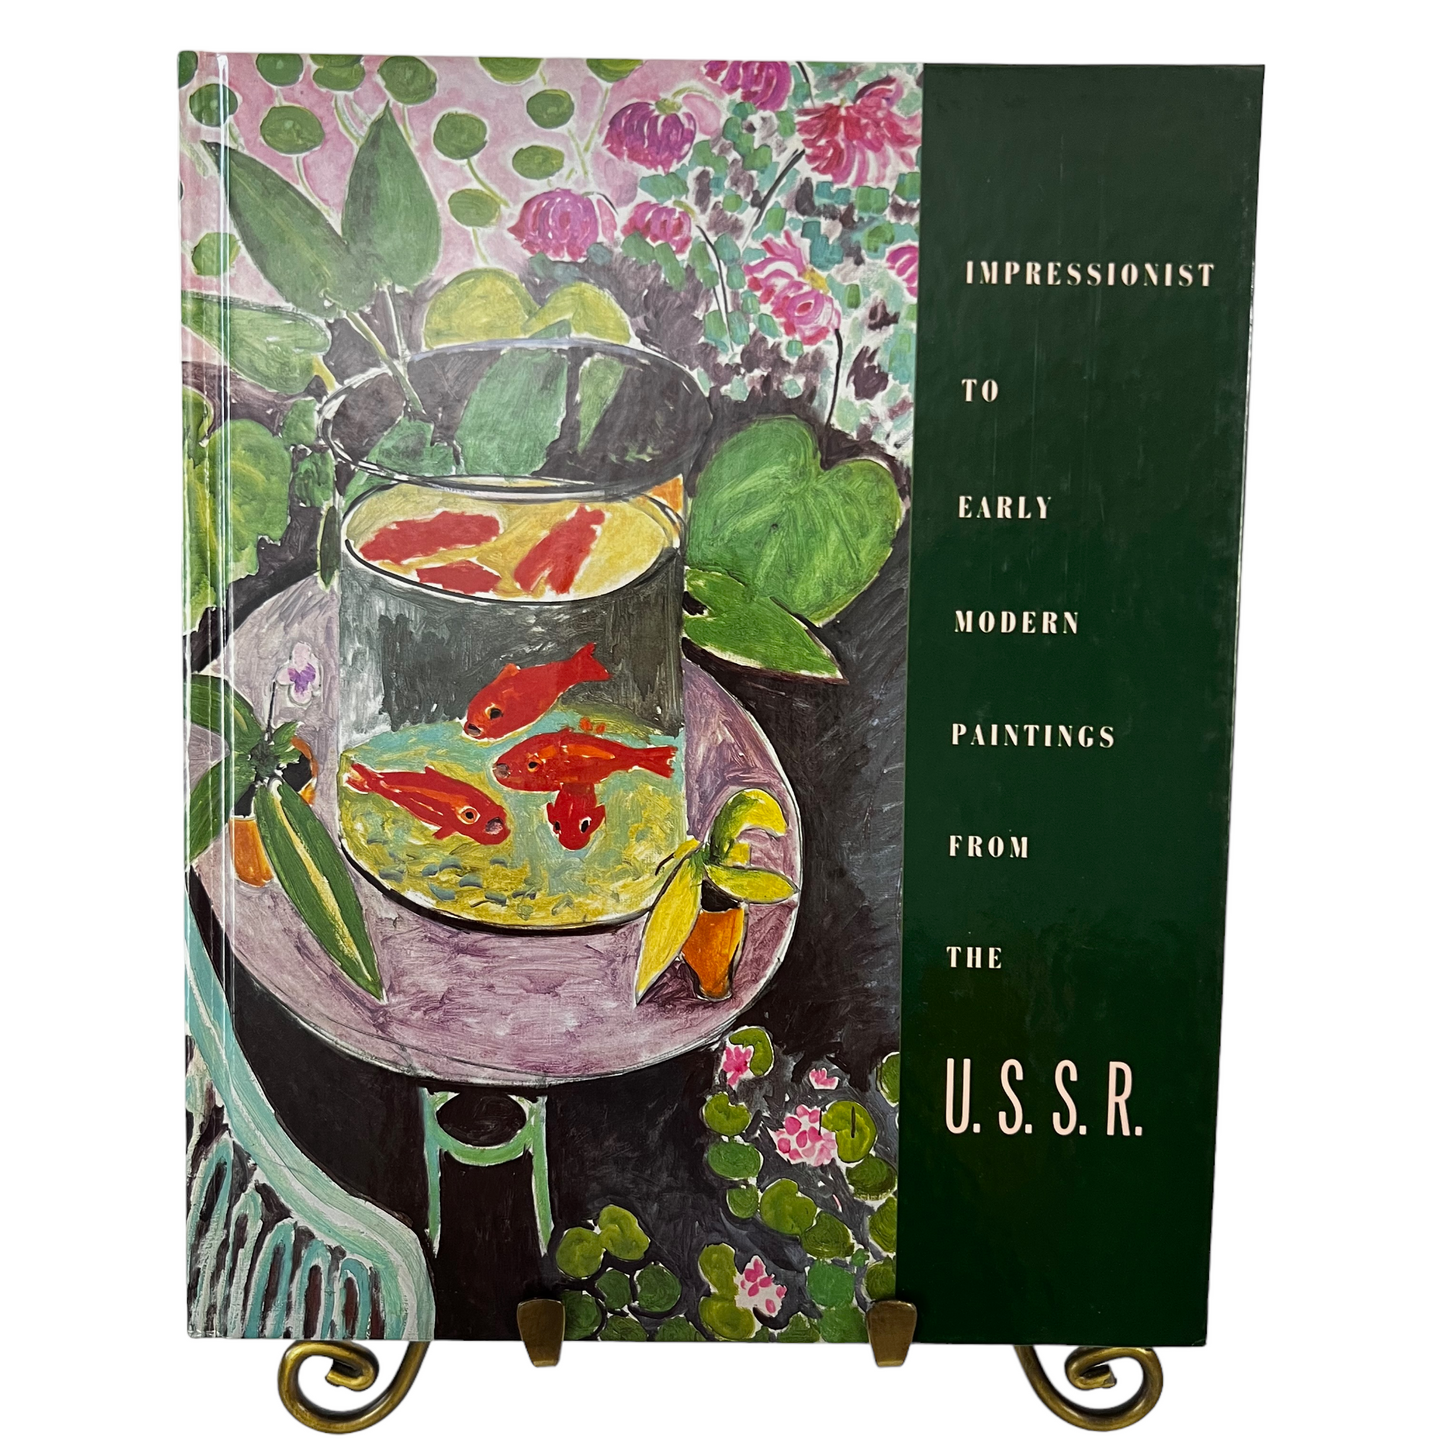 Impressionist to Early Modern Paintings from the U.S.S.R